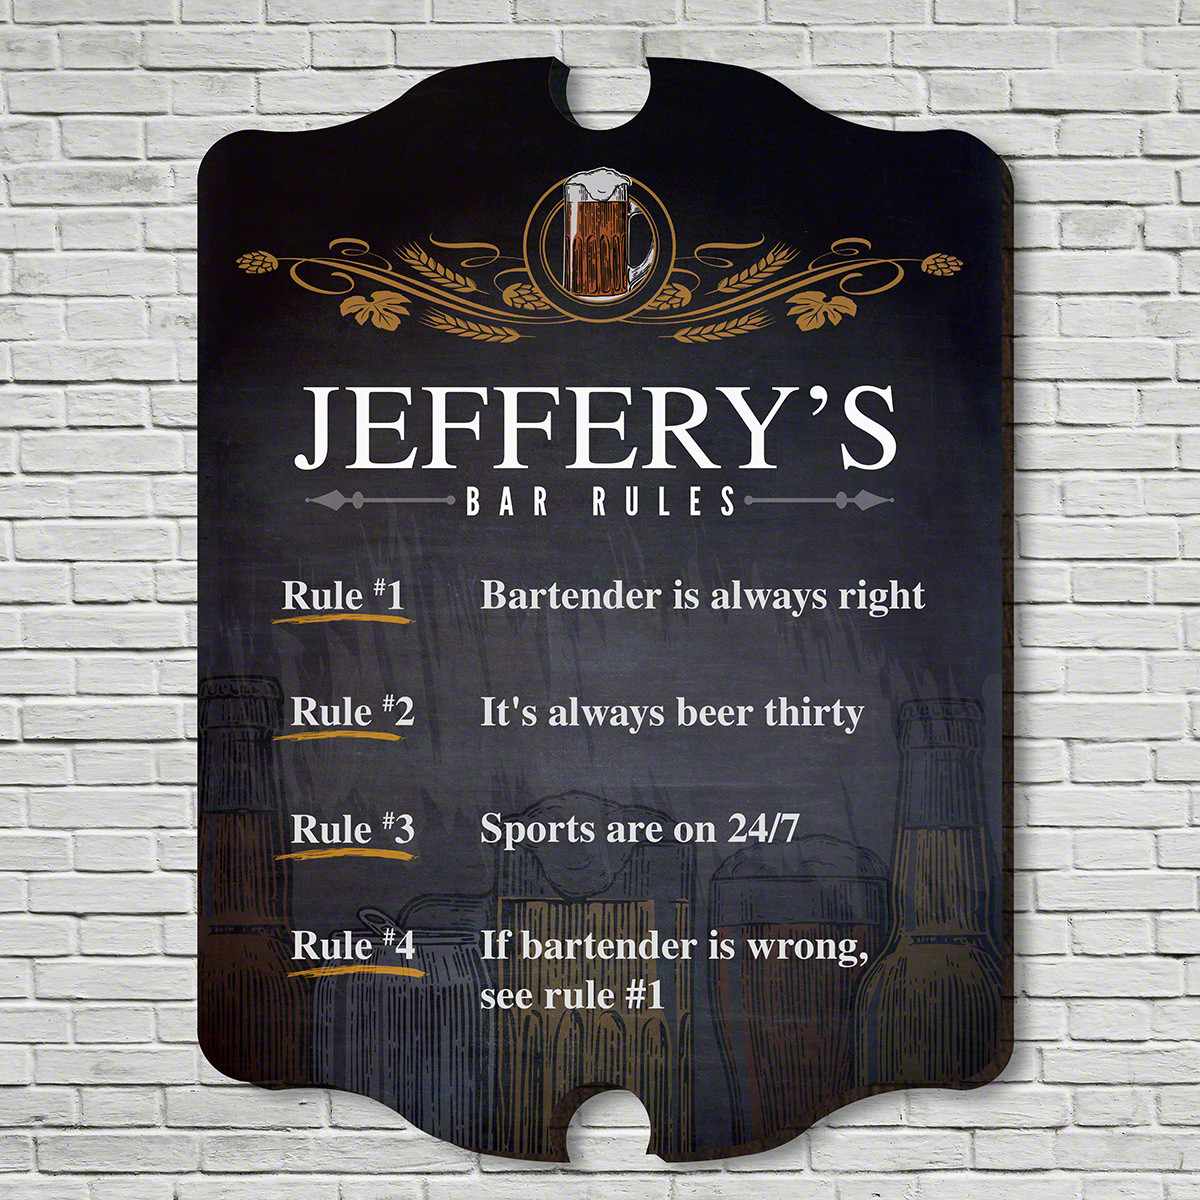 Ensure that a little tomfoolery among friends doesn't get out of hand with this Code of Ethics personalized wooden bar sign. You can engrave your name and 4 of your bar rules to make sure they know who's in charge. Designed to stylishly adorn any man cave #bar